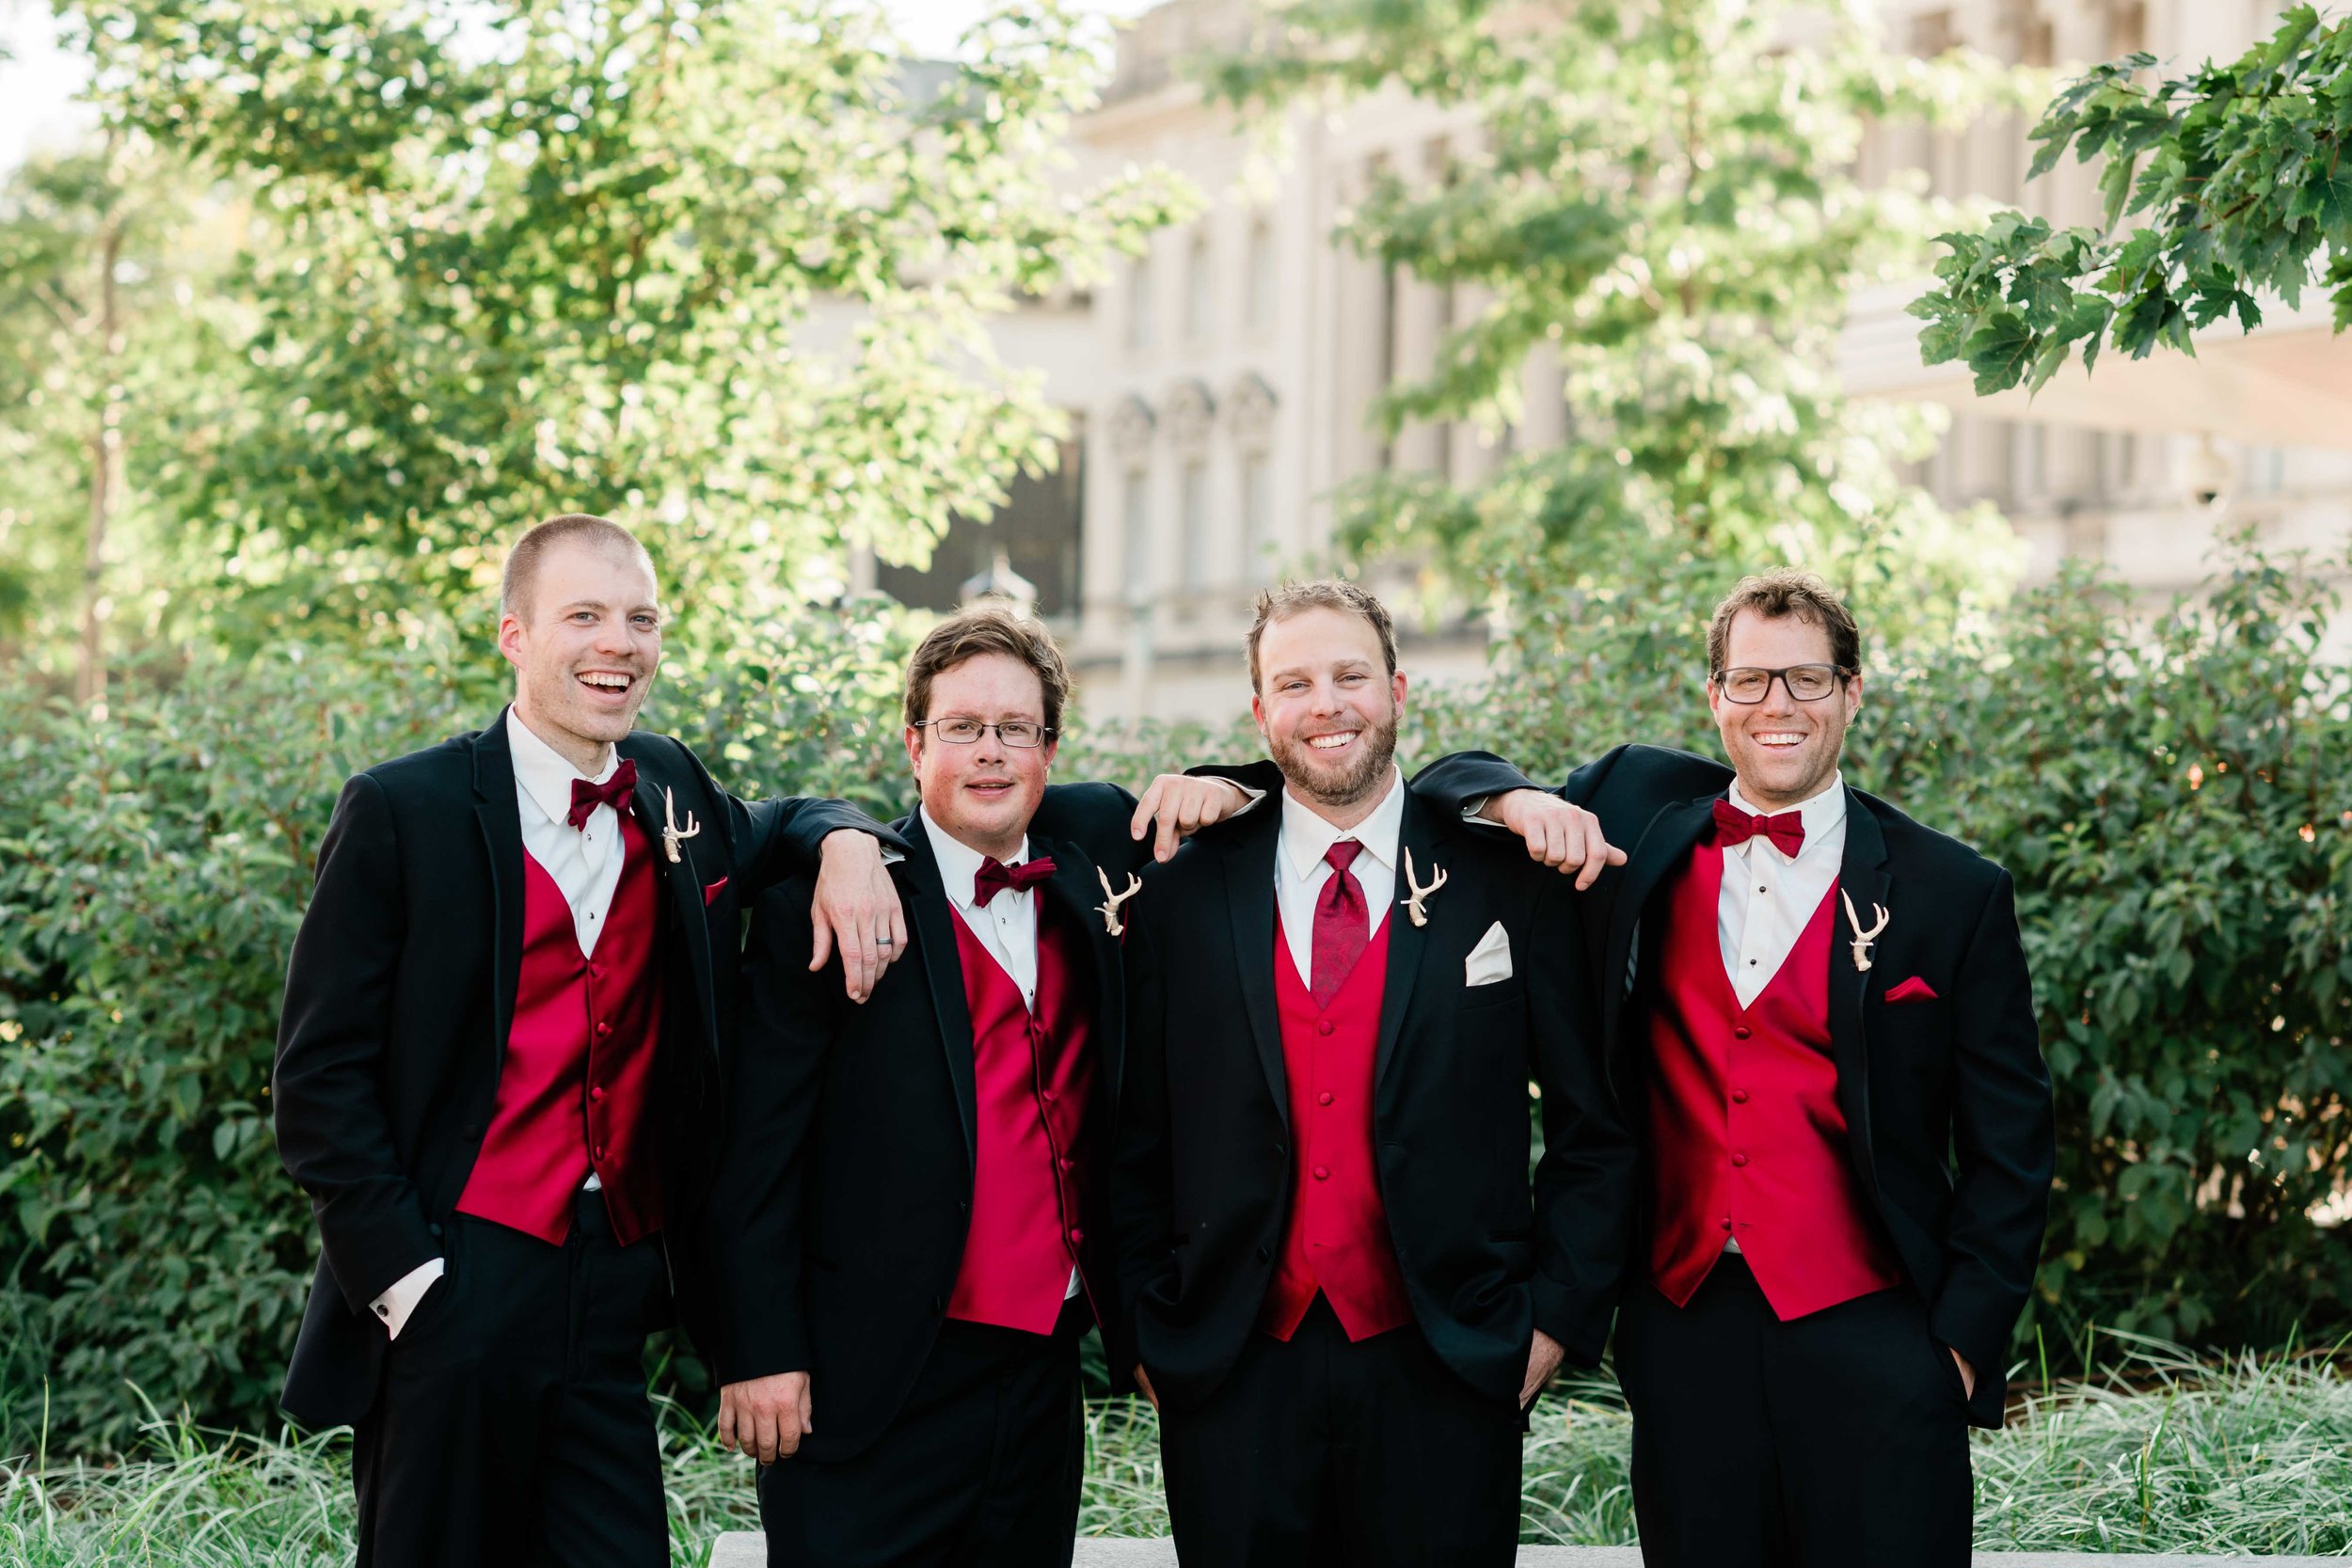 Groom and groomsmen rest their arms on each other's shoulders